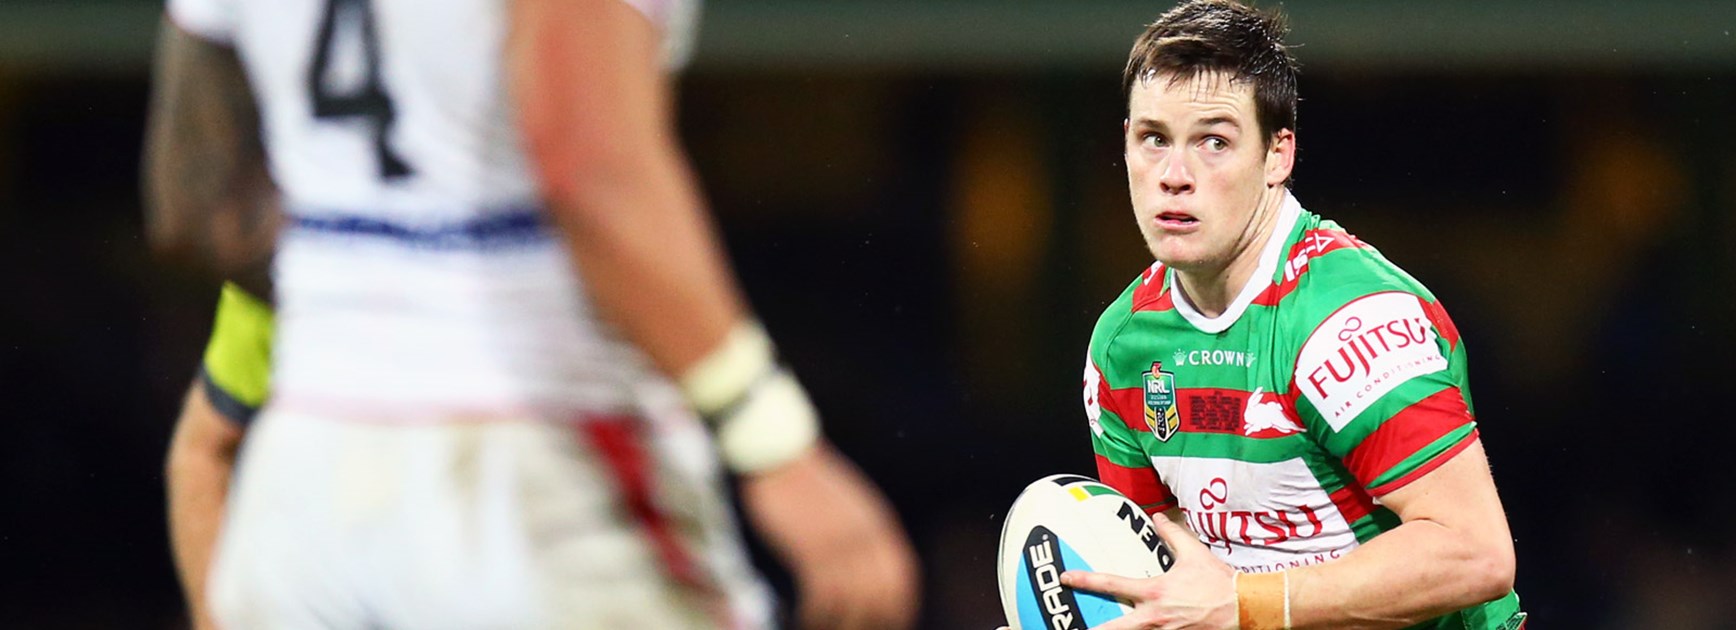 Luke Keary forms a crucial part of the South Sydney side for 2016 according to coach Michael Maguire.